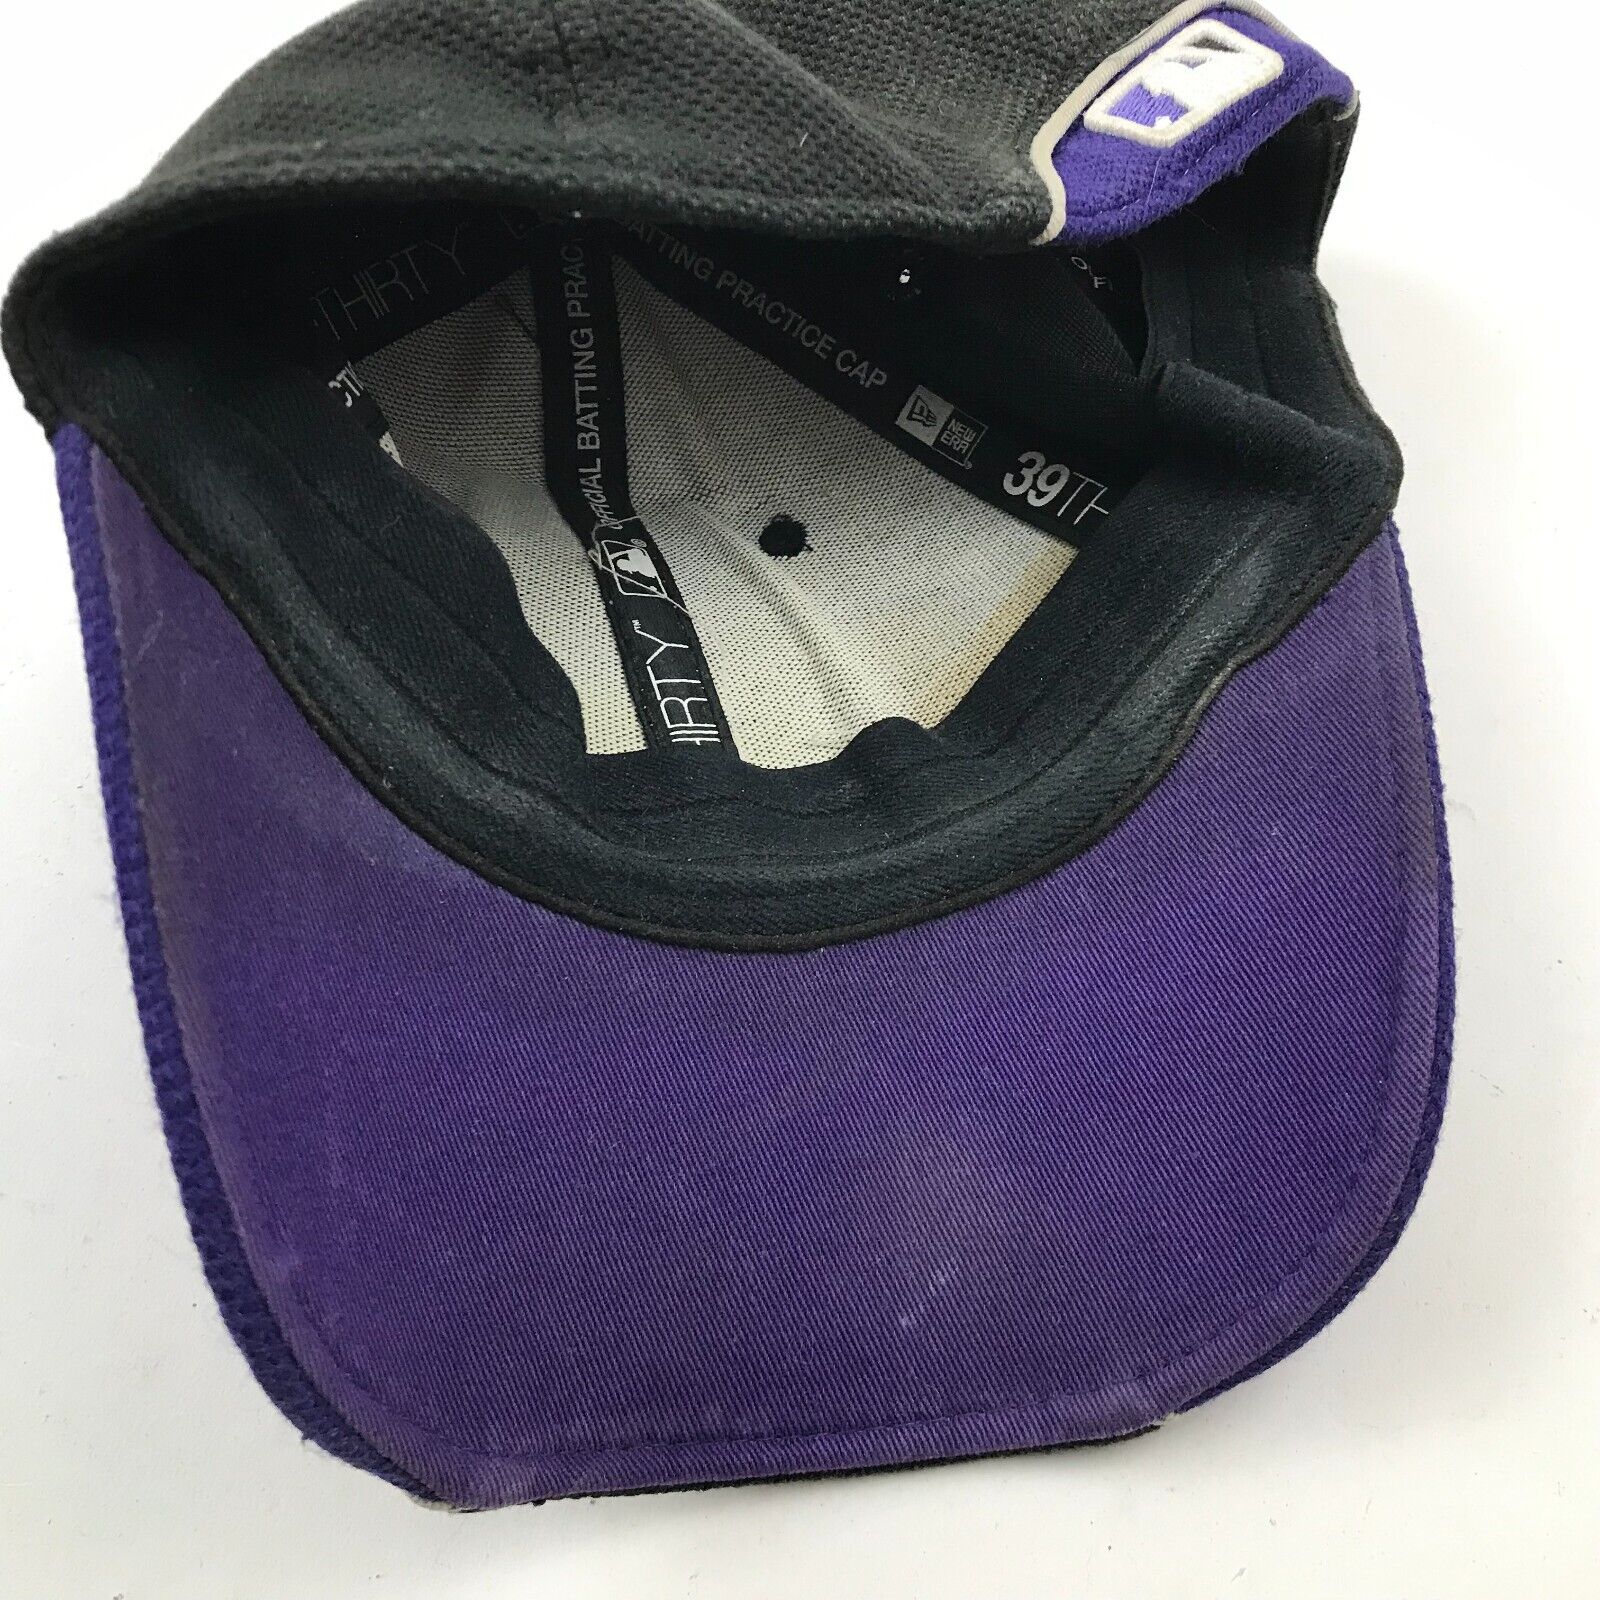 Colorado Rockies Hat Cap Stretch Fit Youth Black Purple New Era Embroidered  MLB